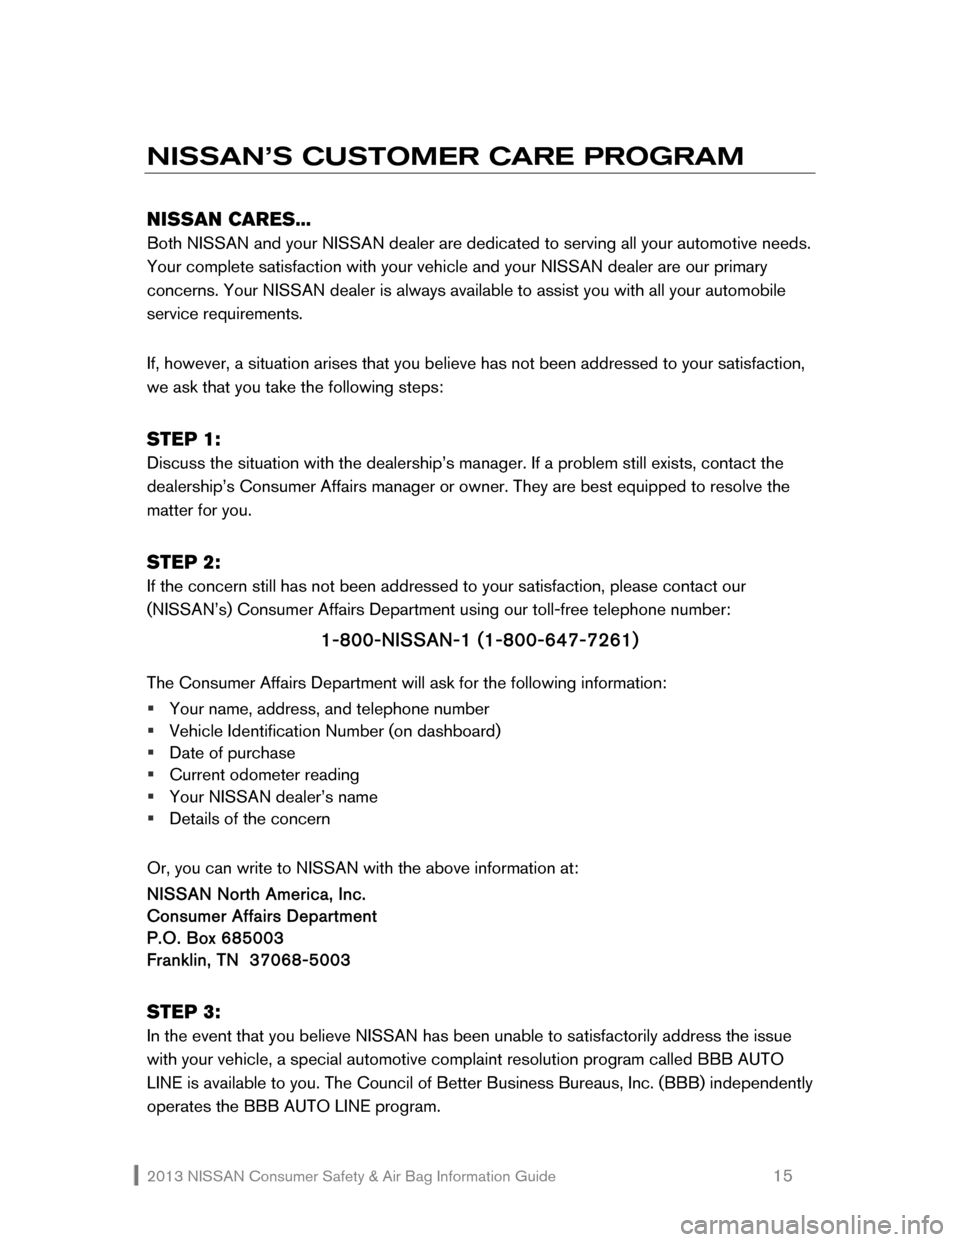 NISSAN ALTIMA COUPE 2013 D32 / 4.G Consumer Safety Air Bag Information Guide 2013 NISSAN Consumer Safety & Air Bag Information Guide                                                   15 
NISSAN’S CUSTOMER CARE PROGRAM 
 
NISSAN CARES... 
Both NISSAN and your NISSAN dealer ar